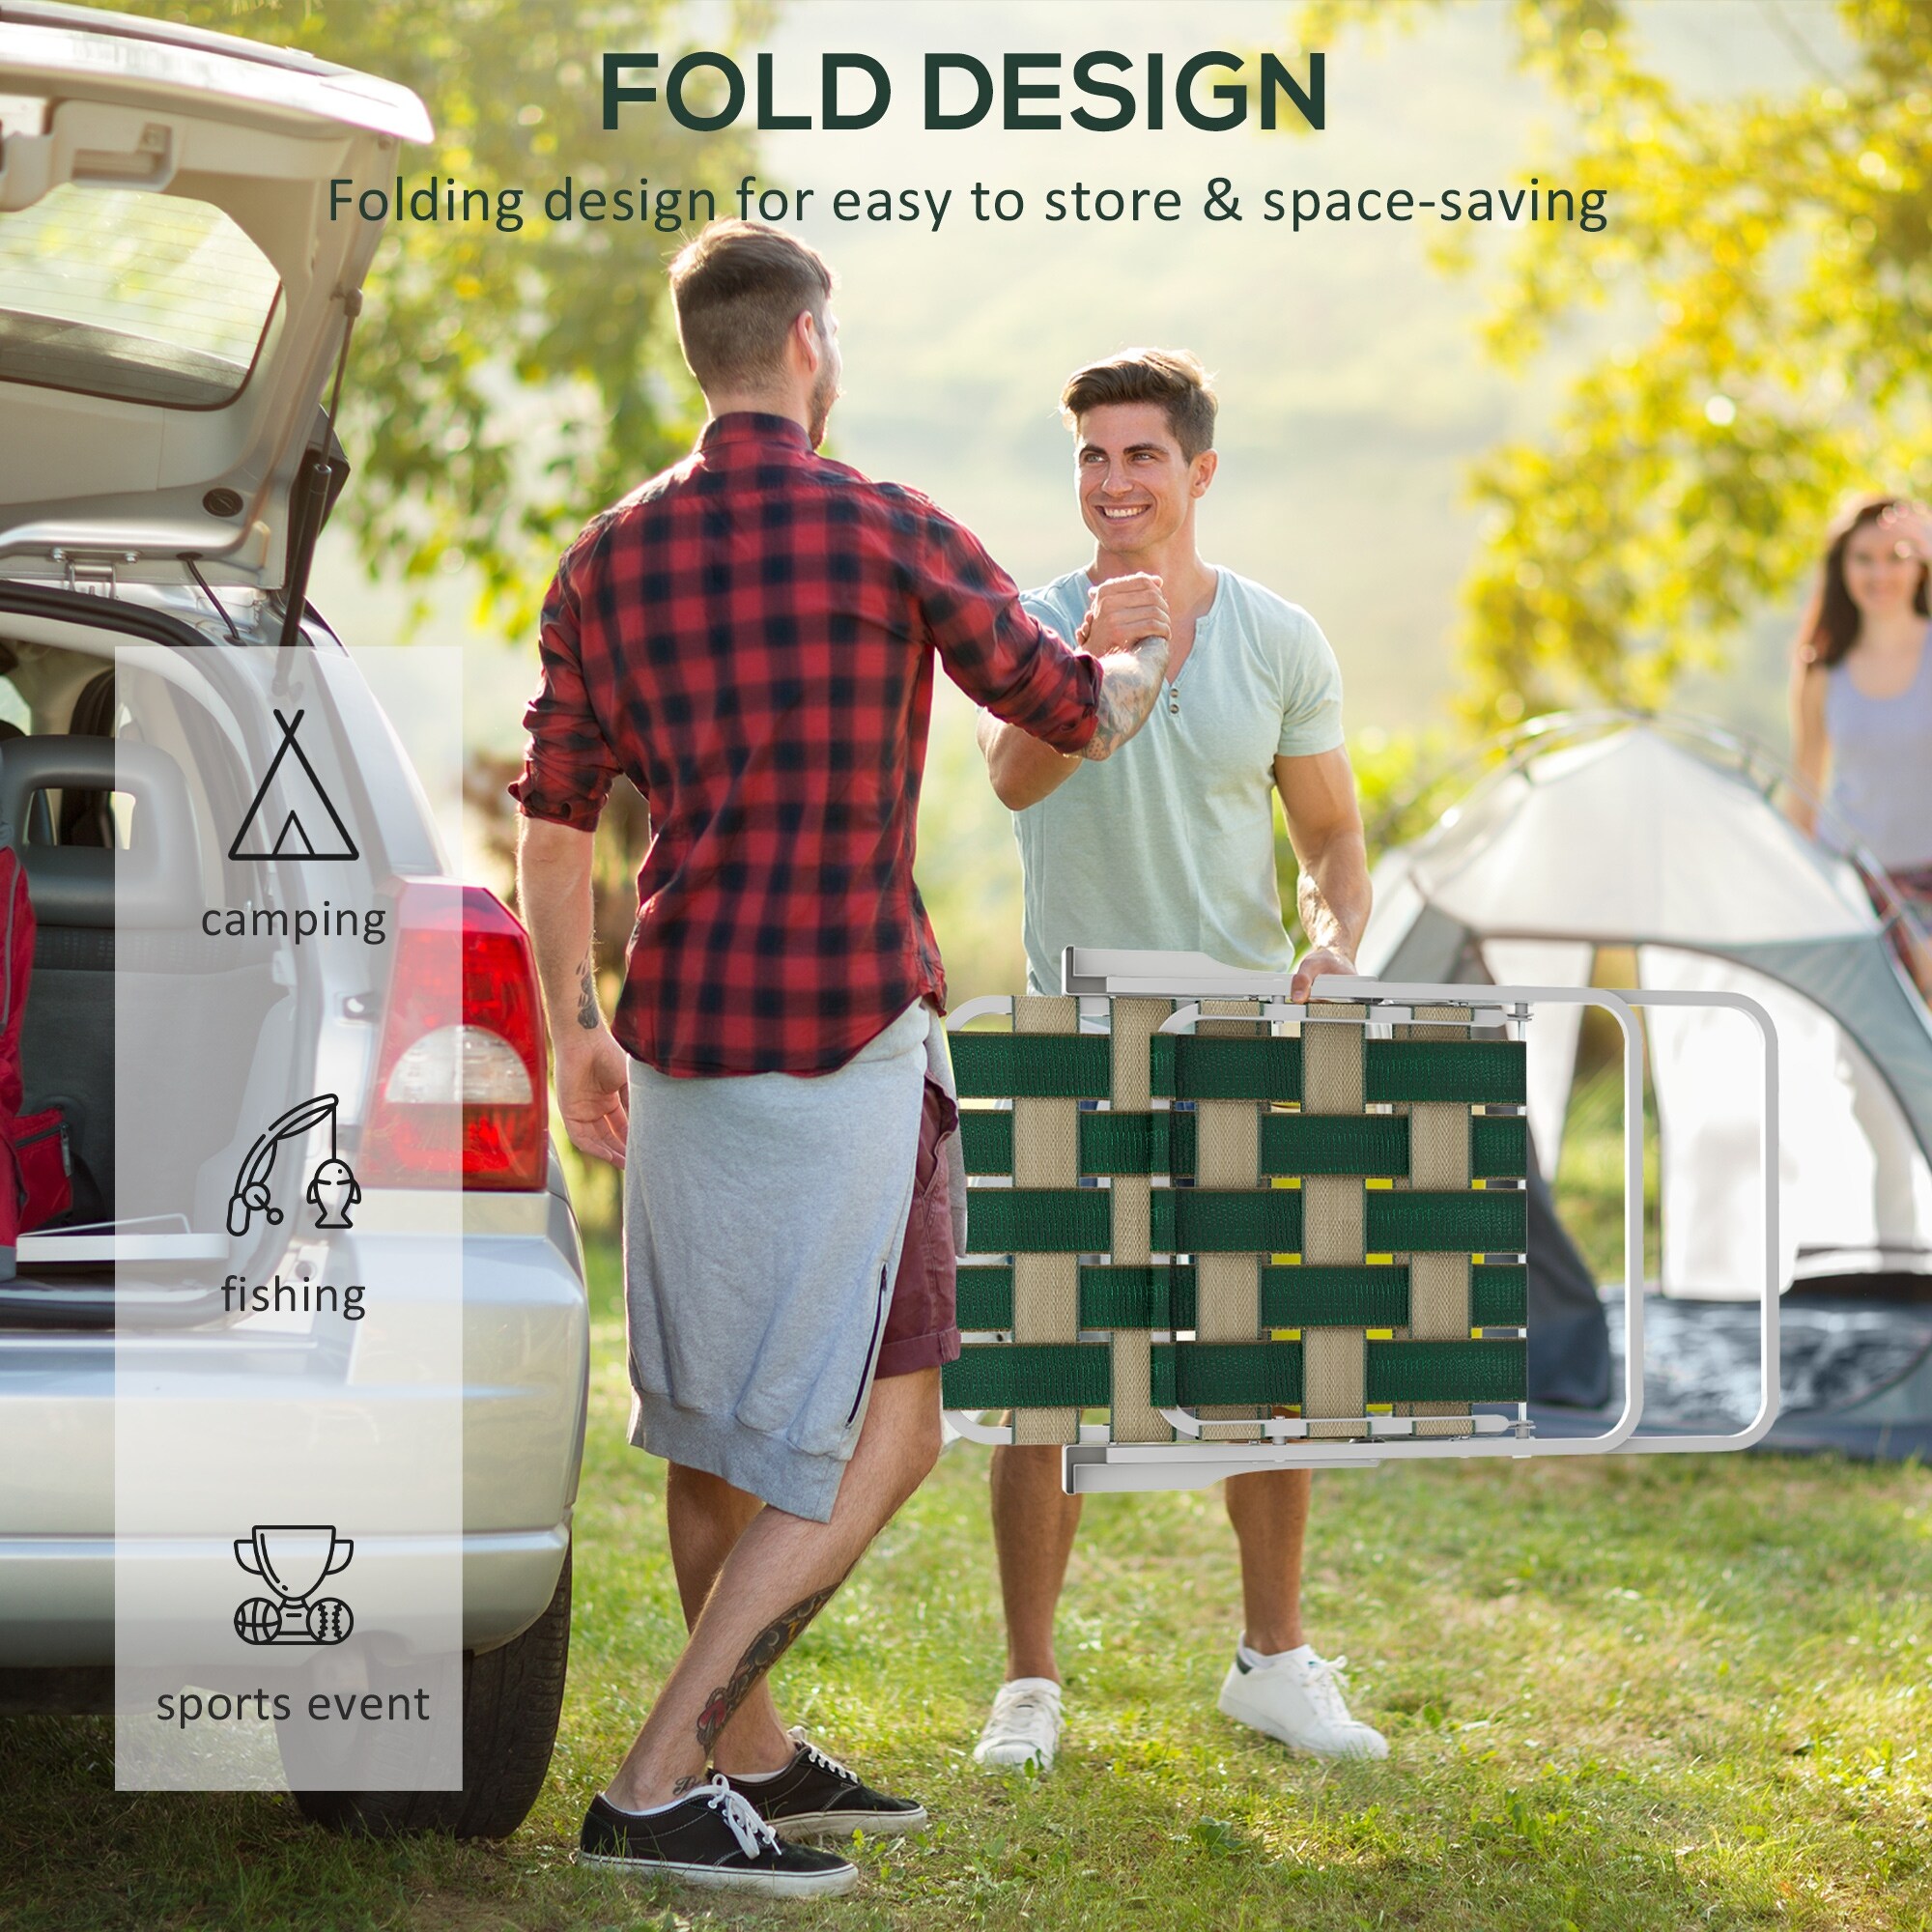 Outsunny Set of 2 Patio Folding Chairs, Classic Outdoor Camping Chairs, Portable Lawn Chairs for Camping - Green